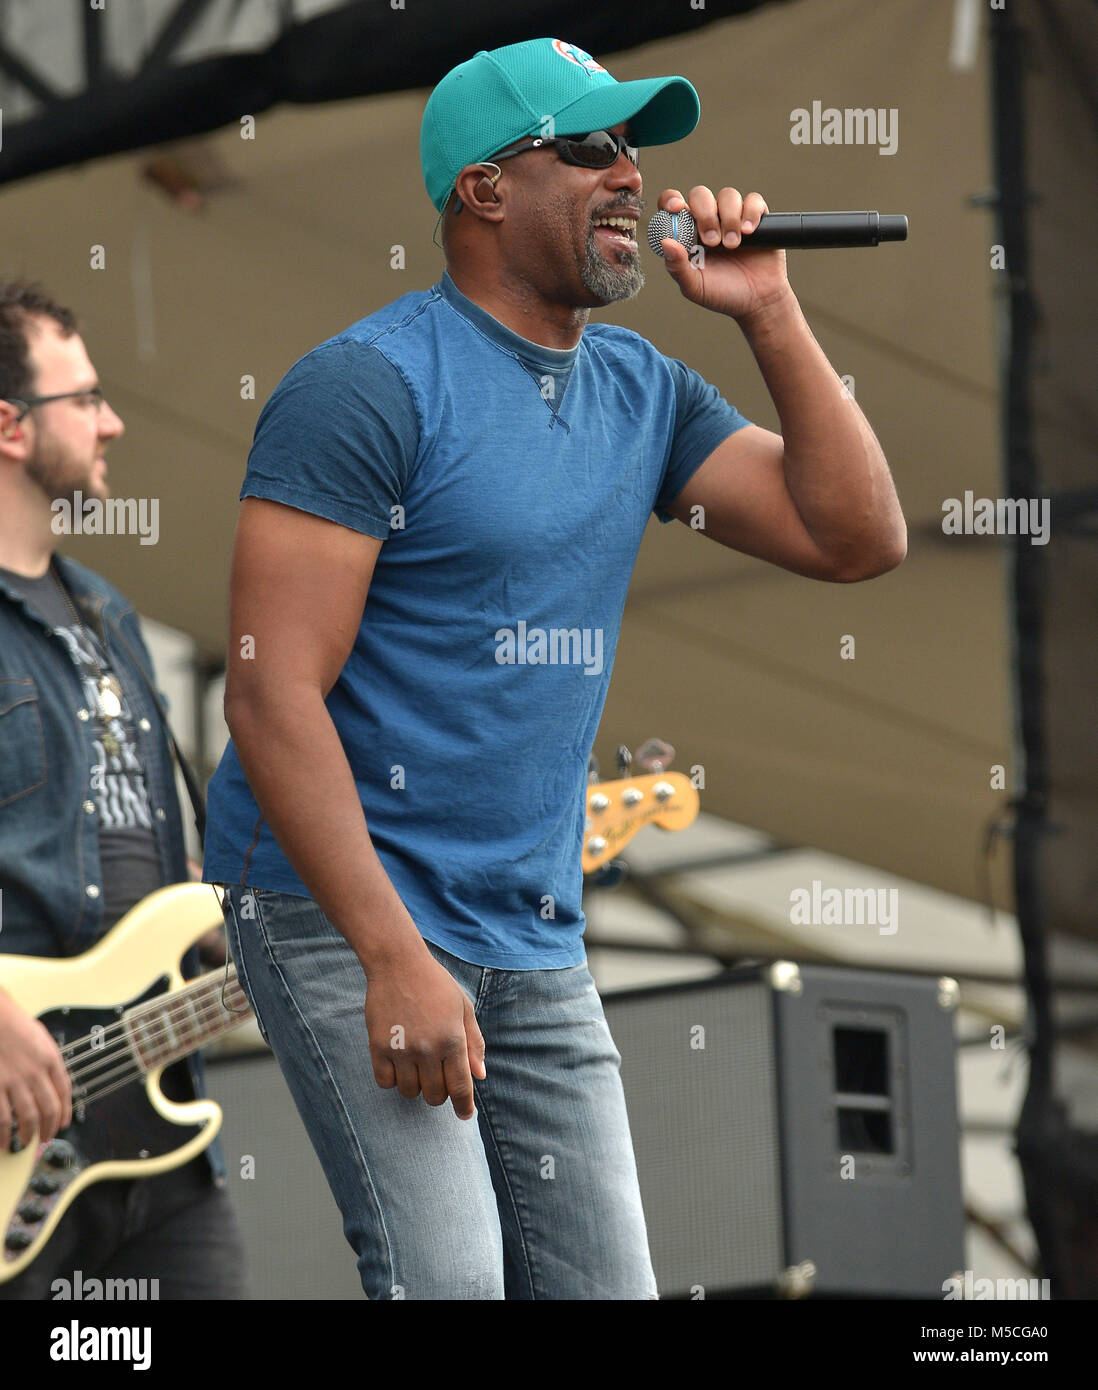 33rd annual Kiss 99.9 Chili Cookoff at CB Smith Park  Featuring: Darius Rucker Where: Pembroke Pines, Florida, United States When: 21 Jan 2018 Credit: JLN Photography/WENN.com Stock Photo